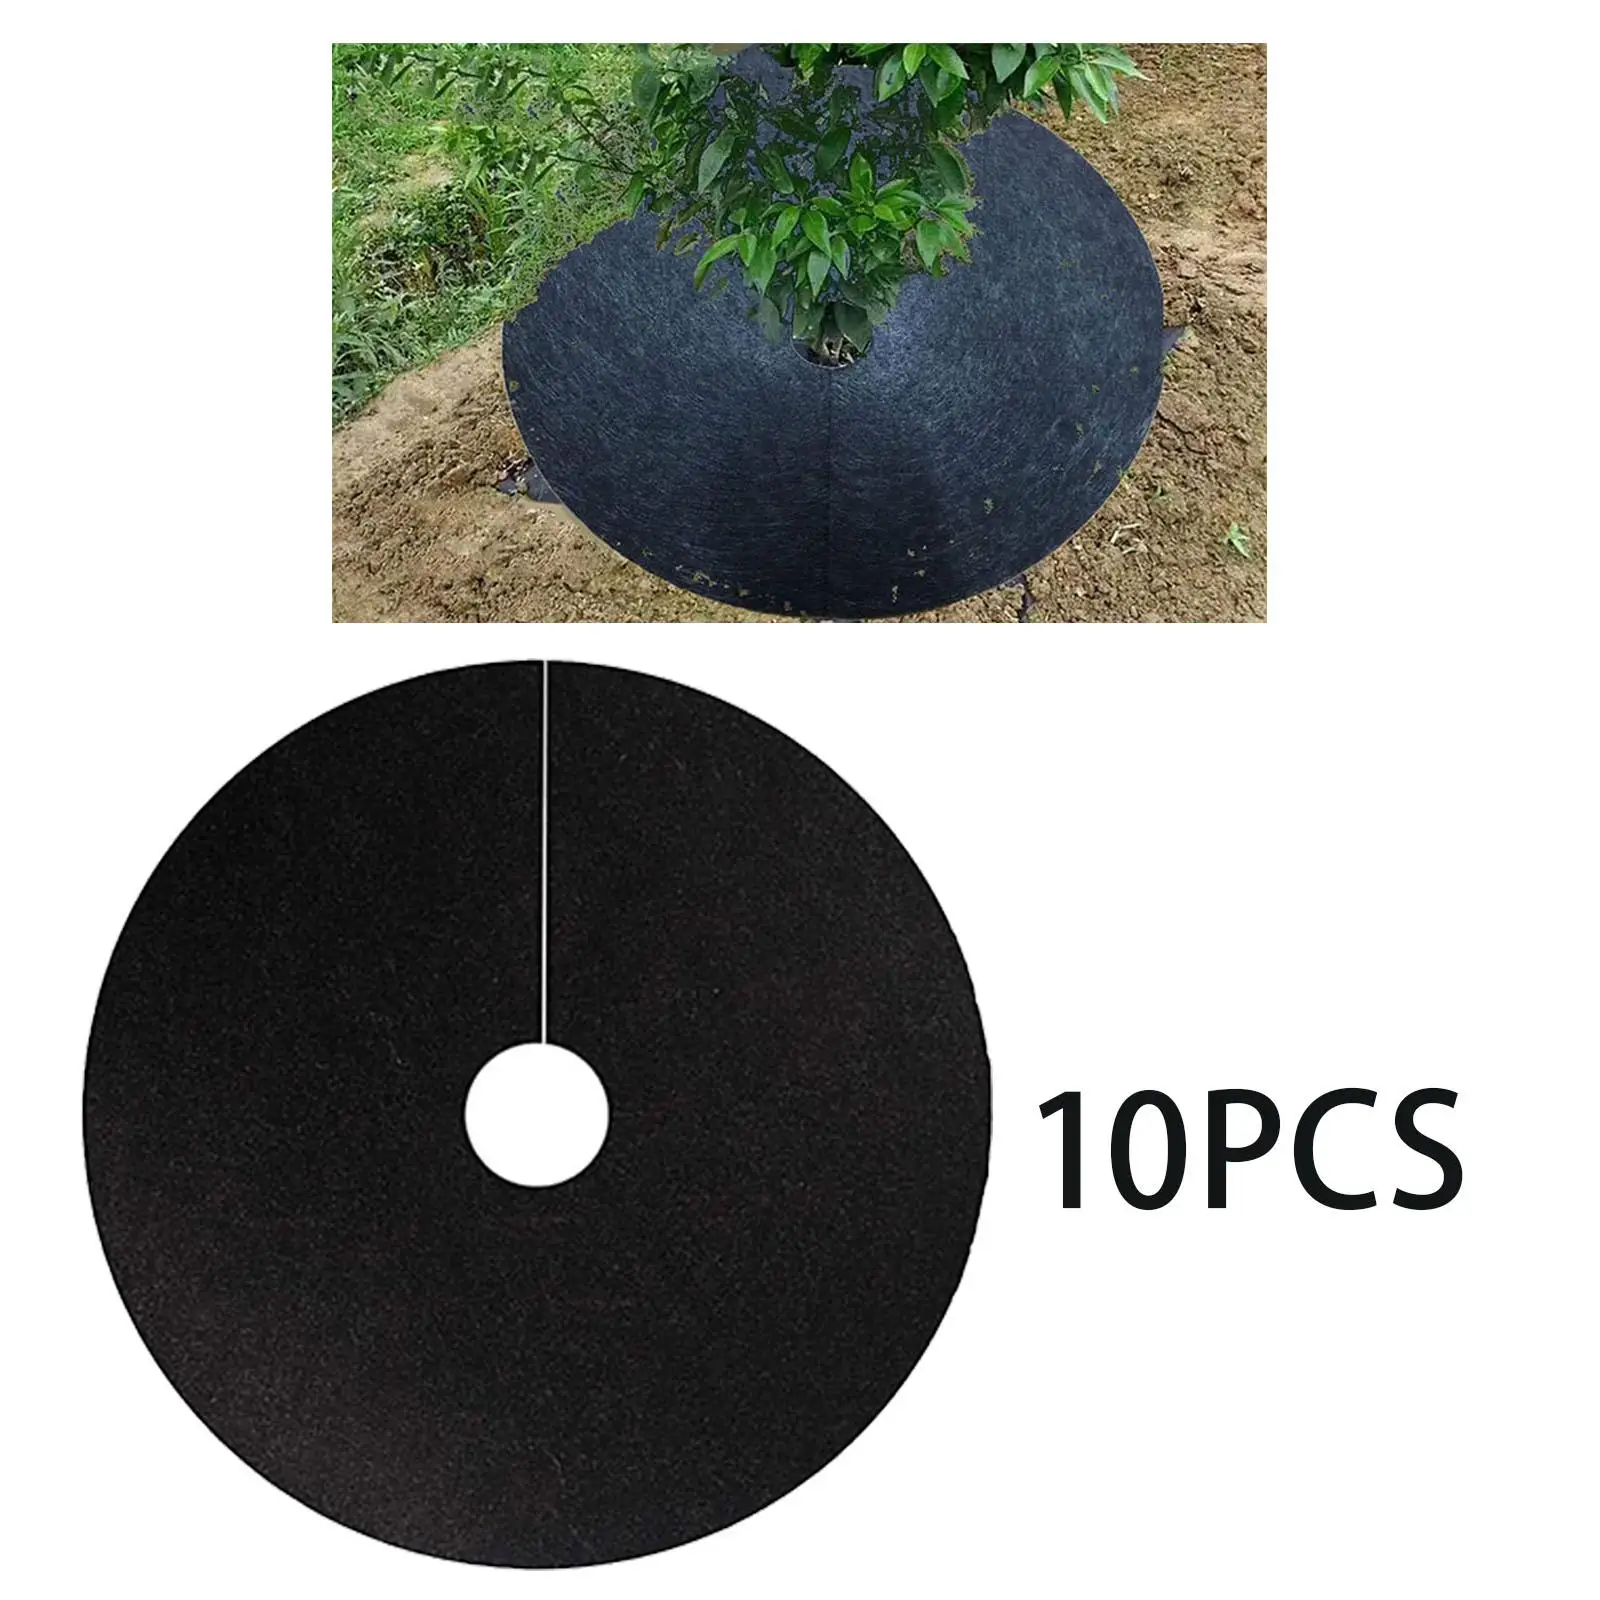 10 Count 52cm Mulch Tree Rings for Weed Control, Tree Protector Mat Easy to Use Degradable Durable Wide Application Landscaping